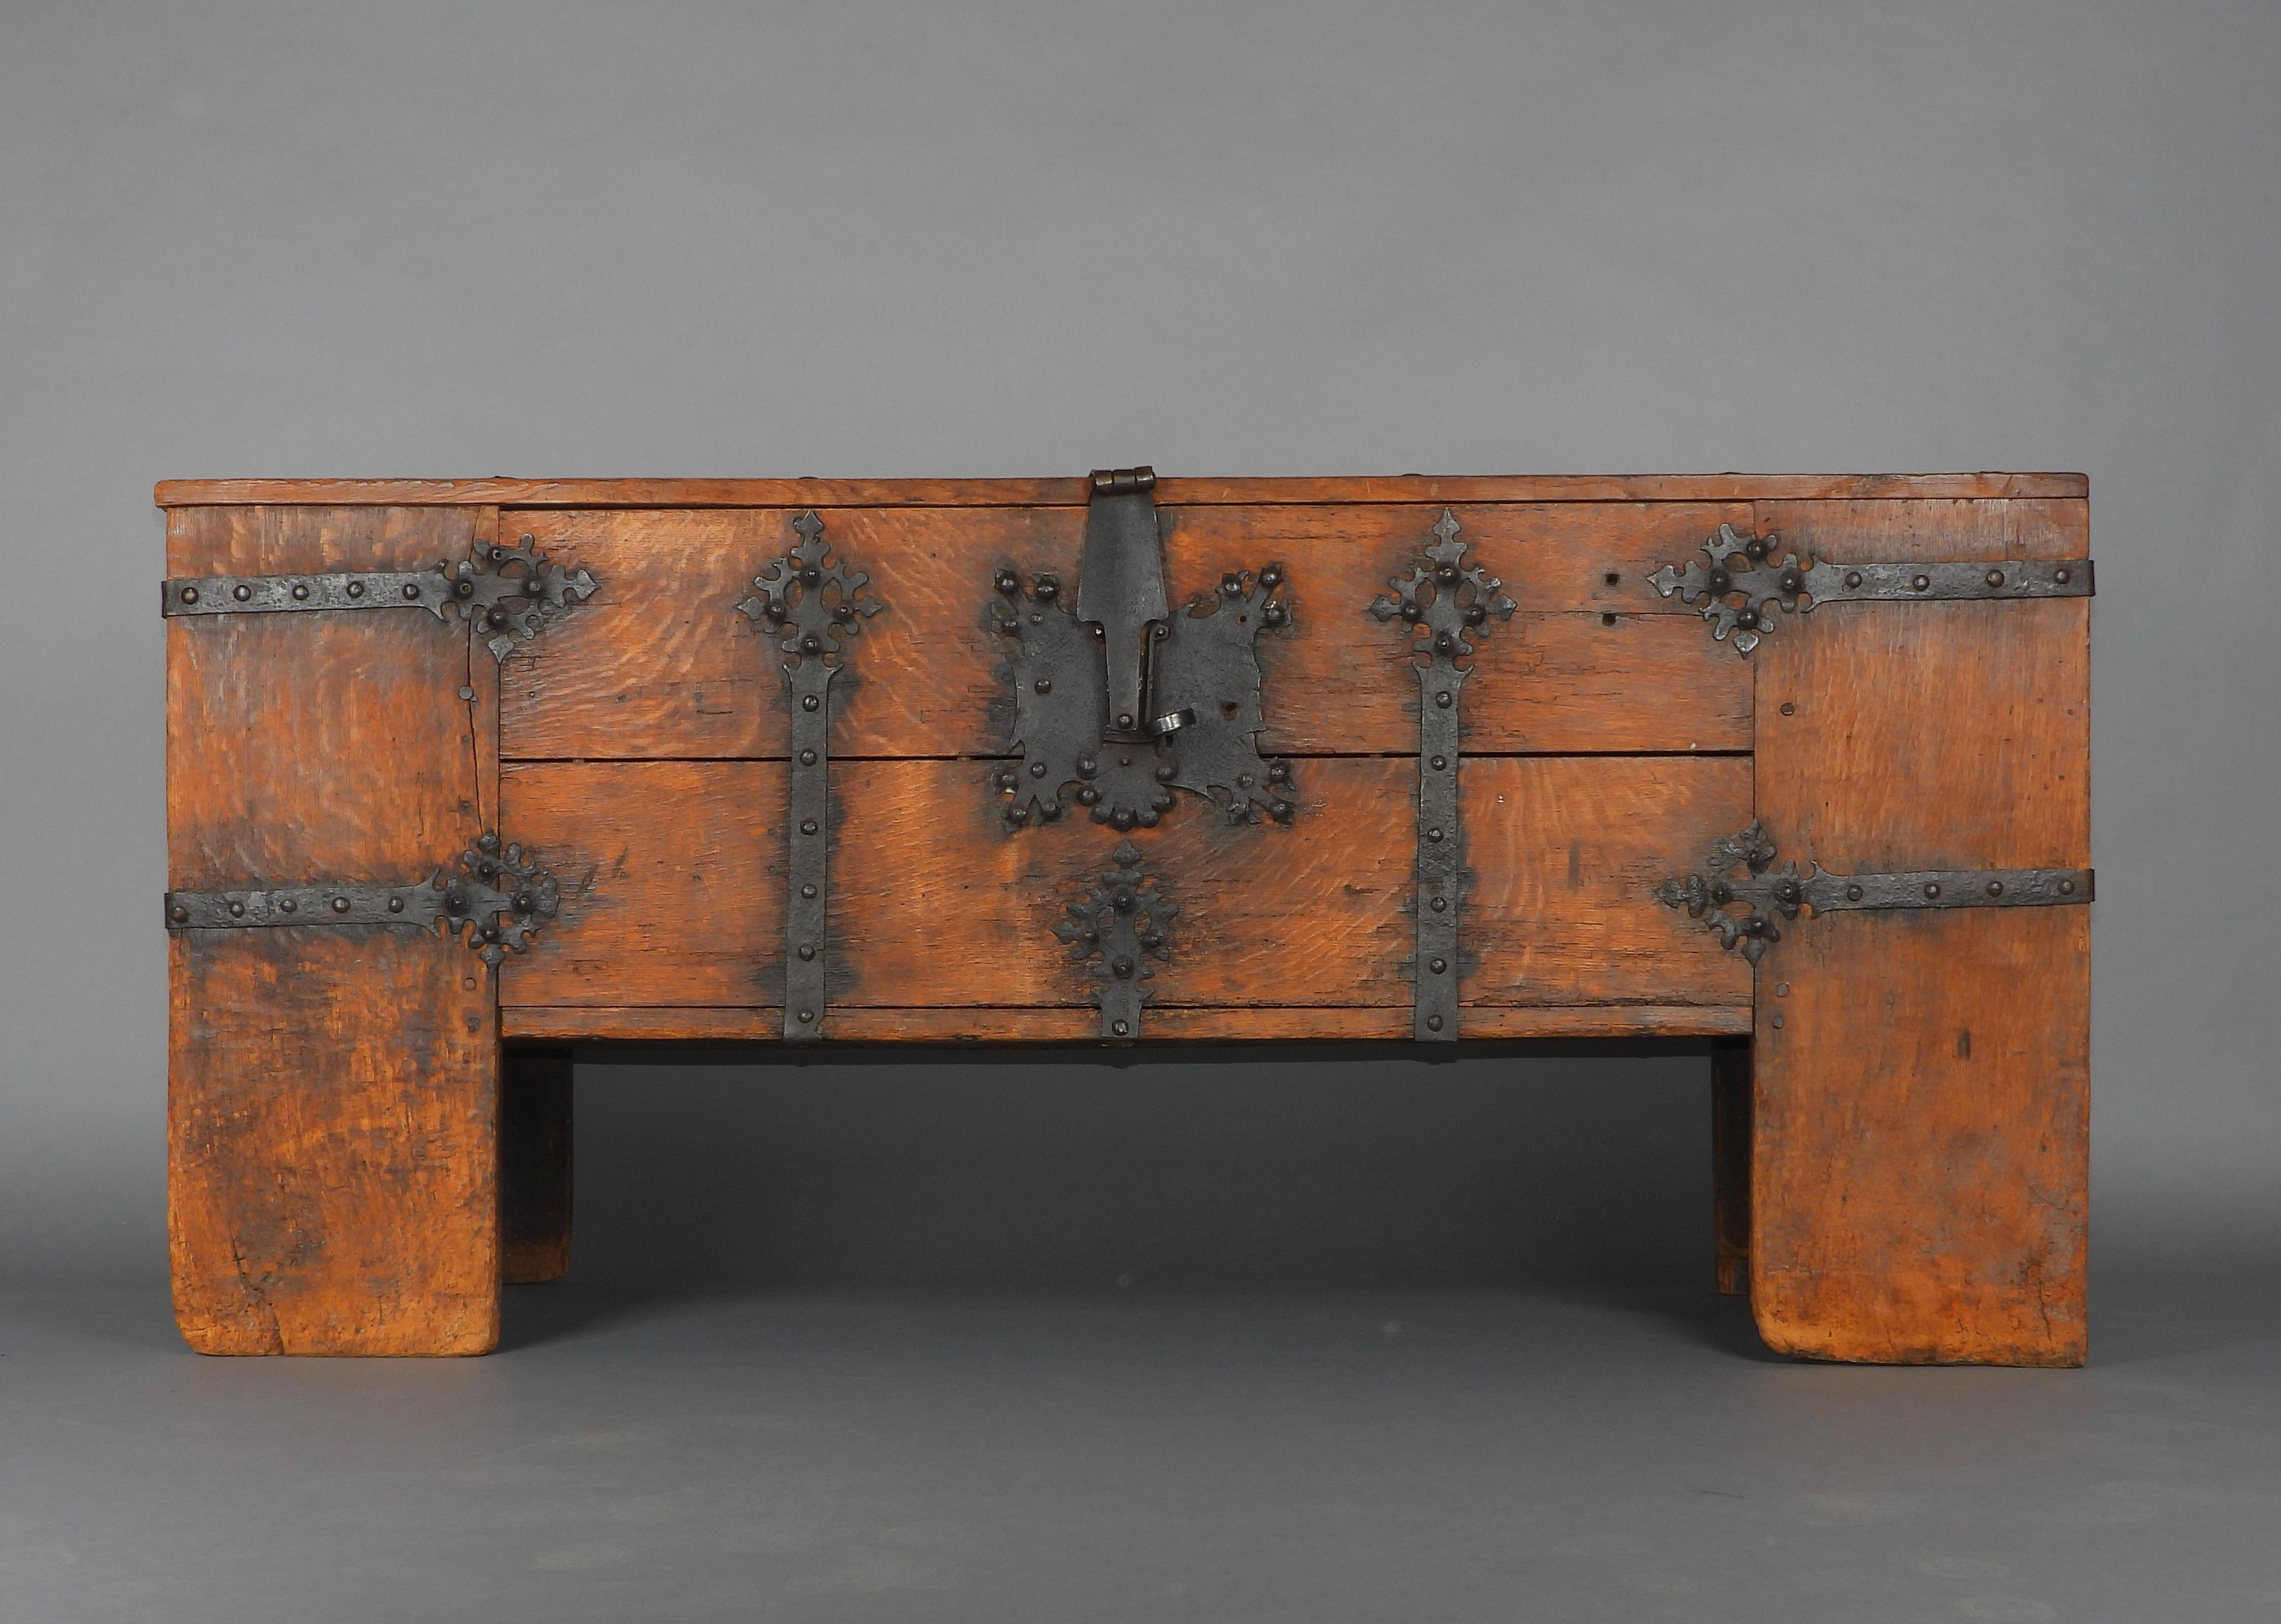 Rare Late Medieval 16th Century German Wrought Iron Oak Chest For Sale 7